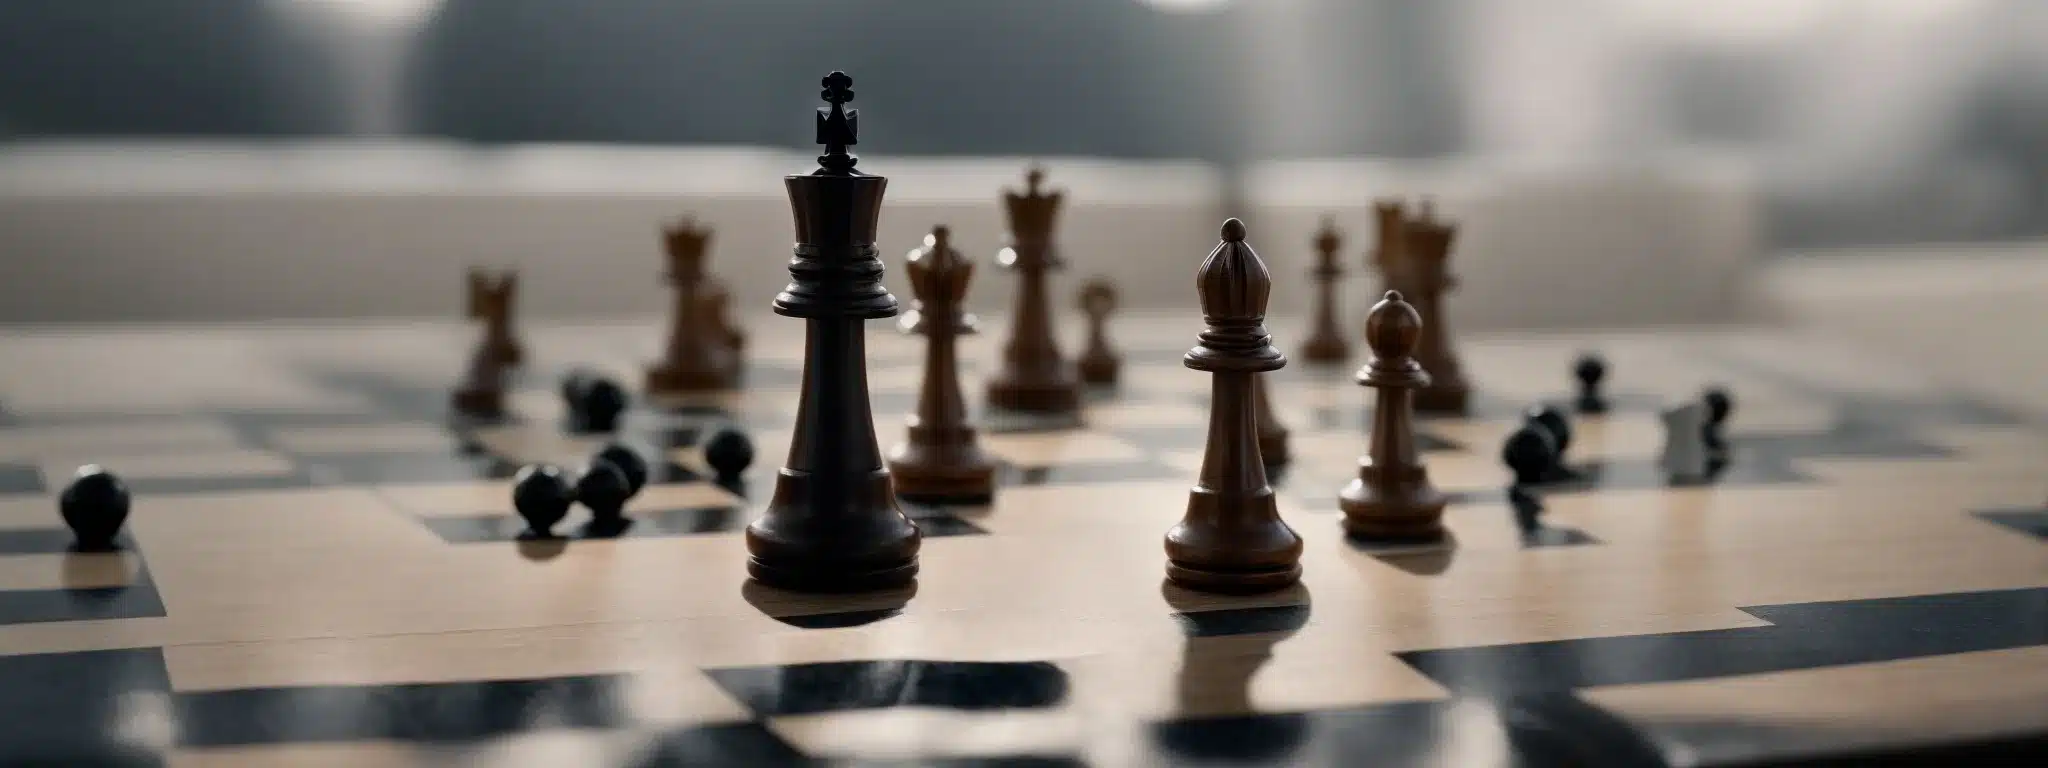 A Solitary Chess Piece Stands On A Strategic Point Of The Board, Symbolizing Calculated Market Positioning Amidst Competitors.